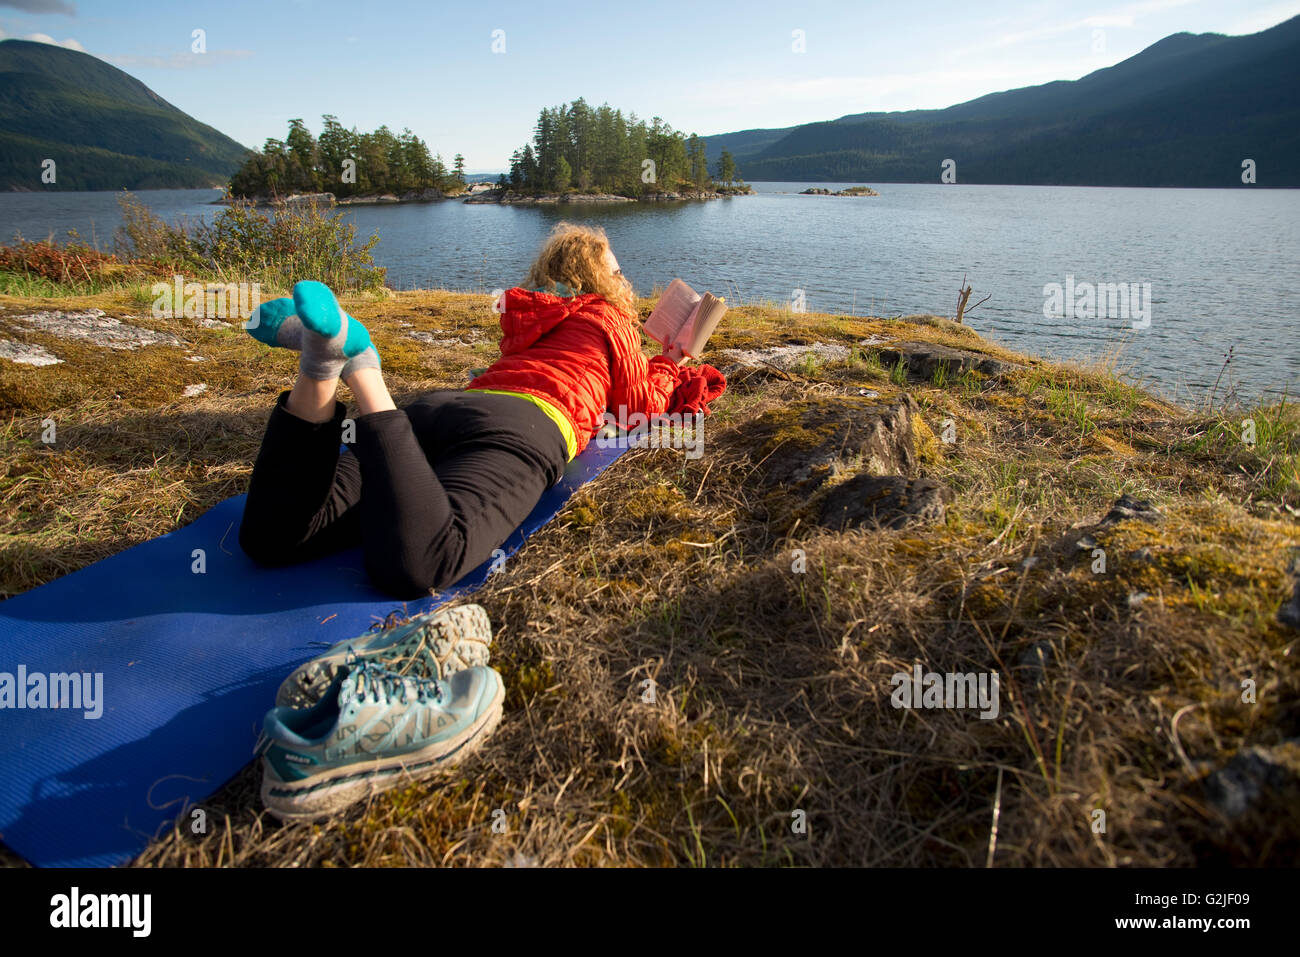 Woman reading book on yoga mat while camping at Kunechin Point. Sechelt Inlet. Sechelt, British Columbia. Canada Stock Photo